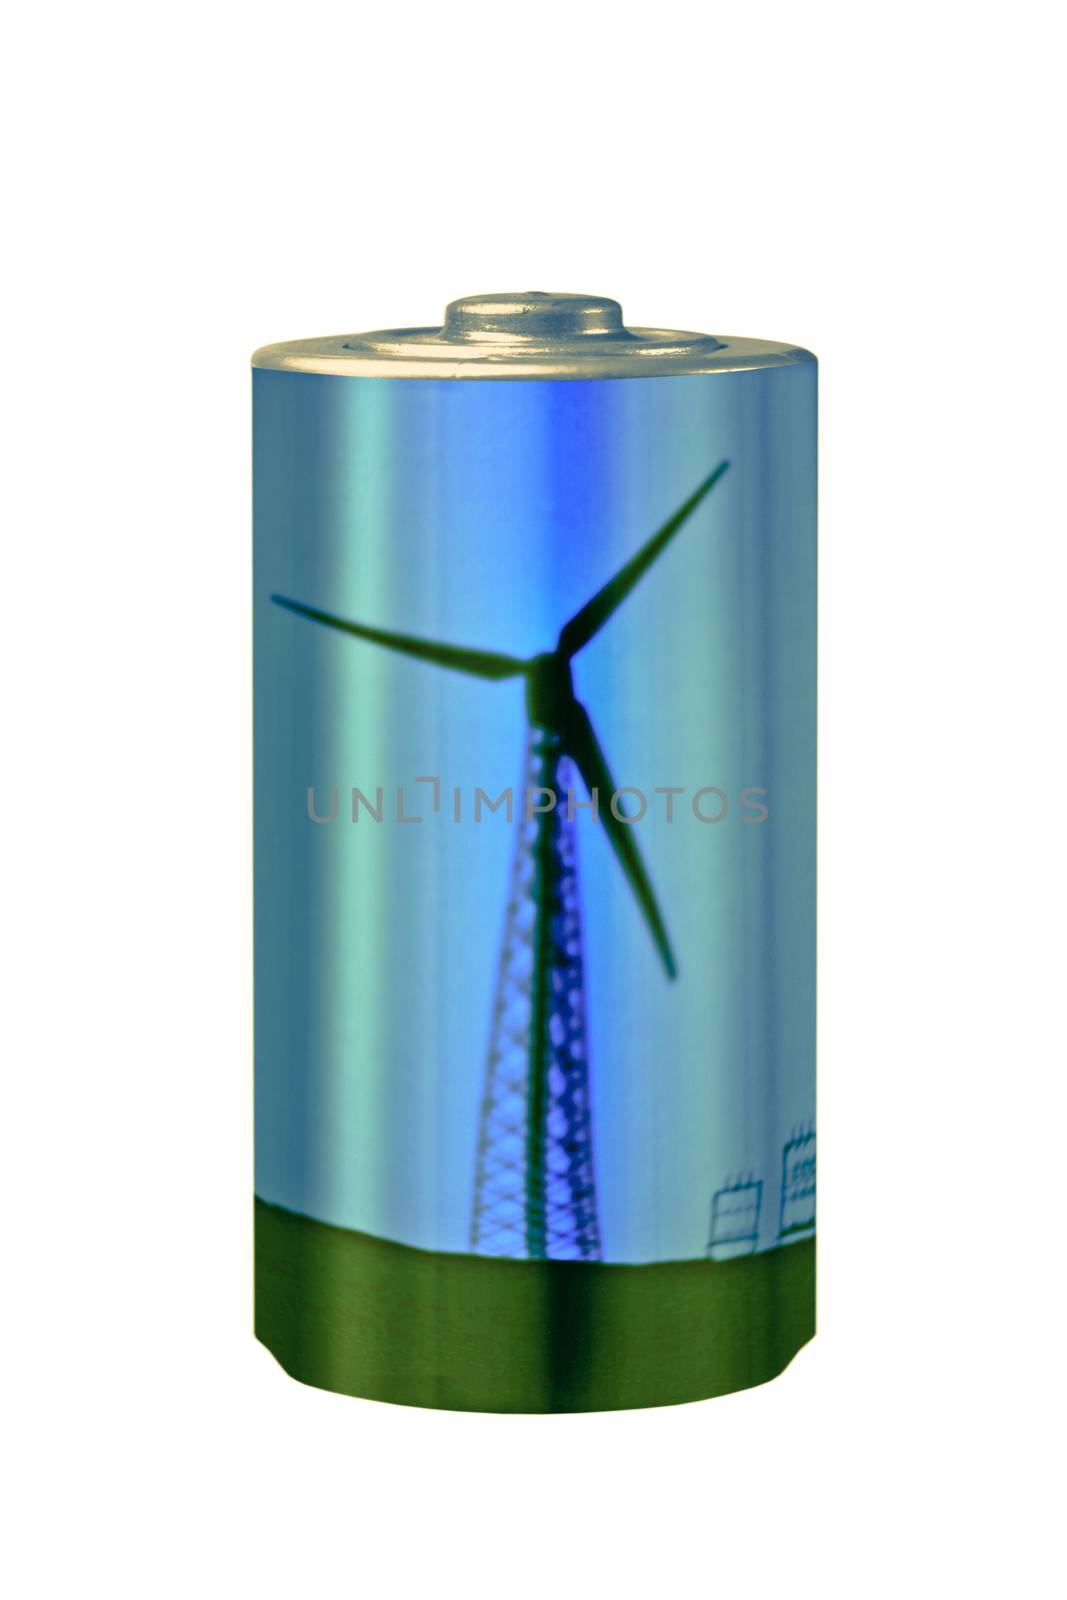 Save Naural energy Concept, Wind energy, Windmill by yands